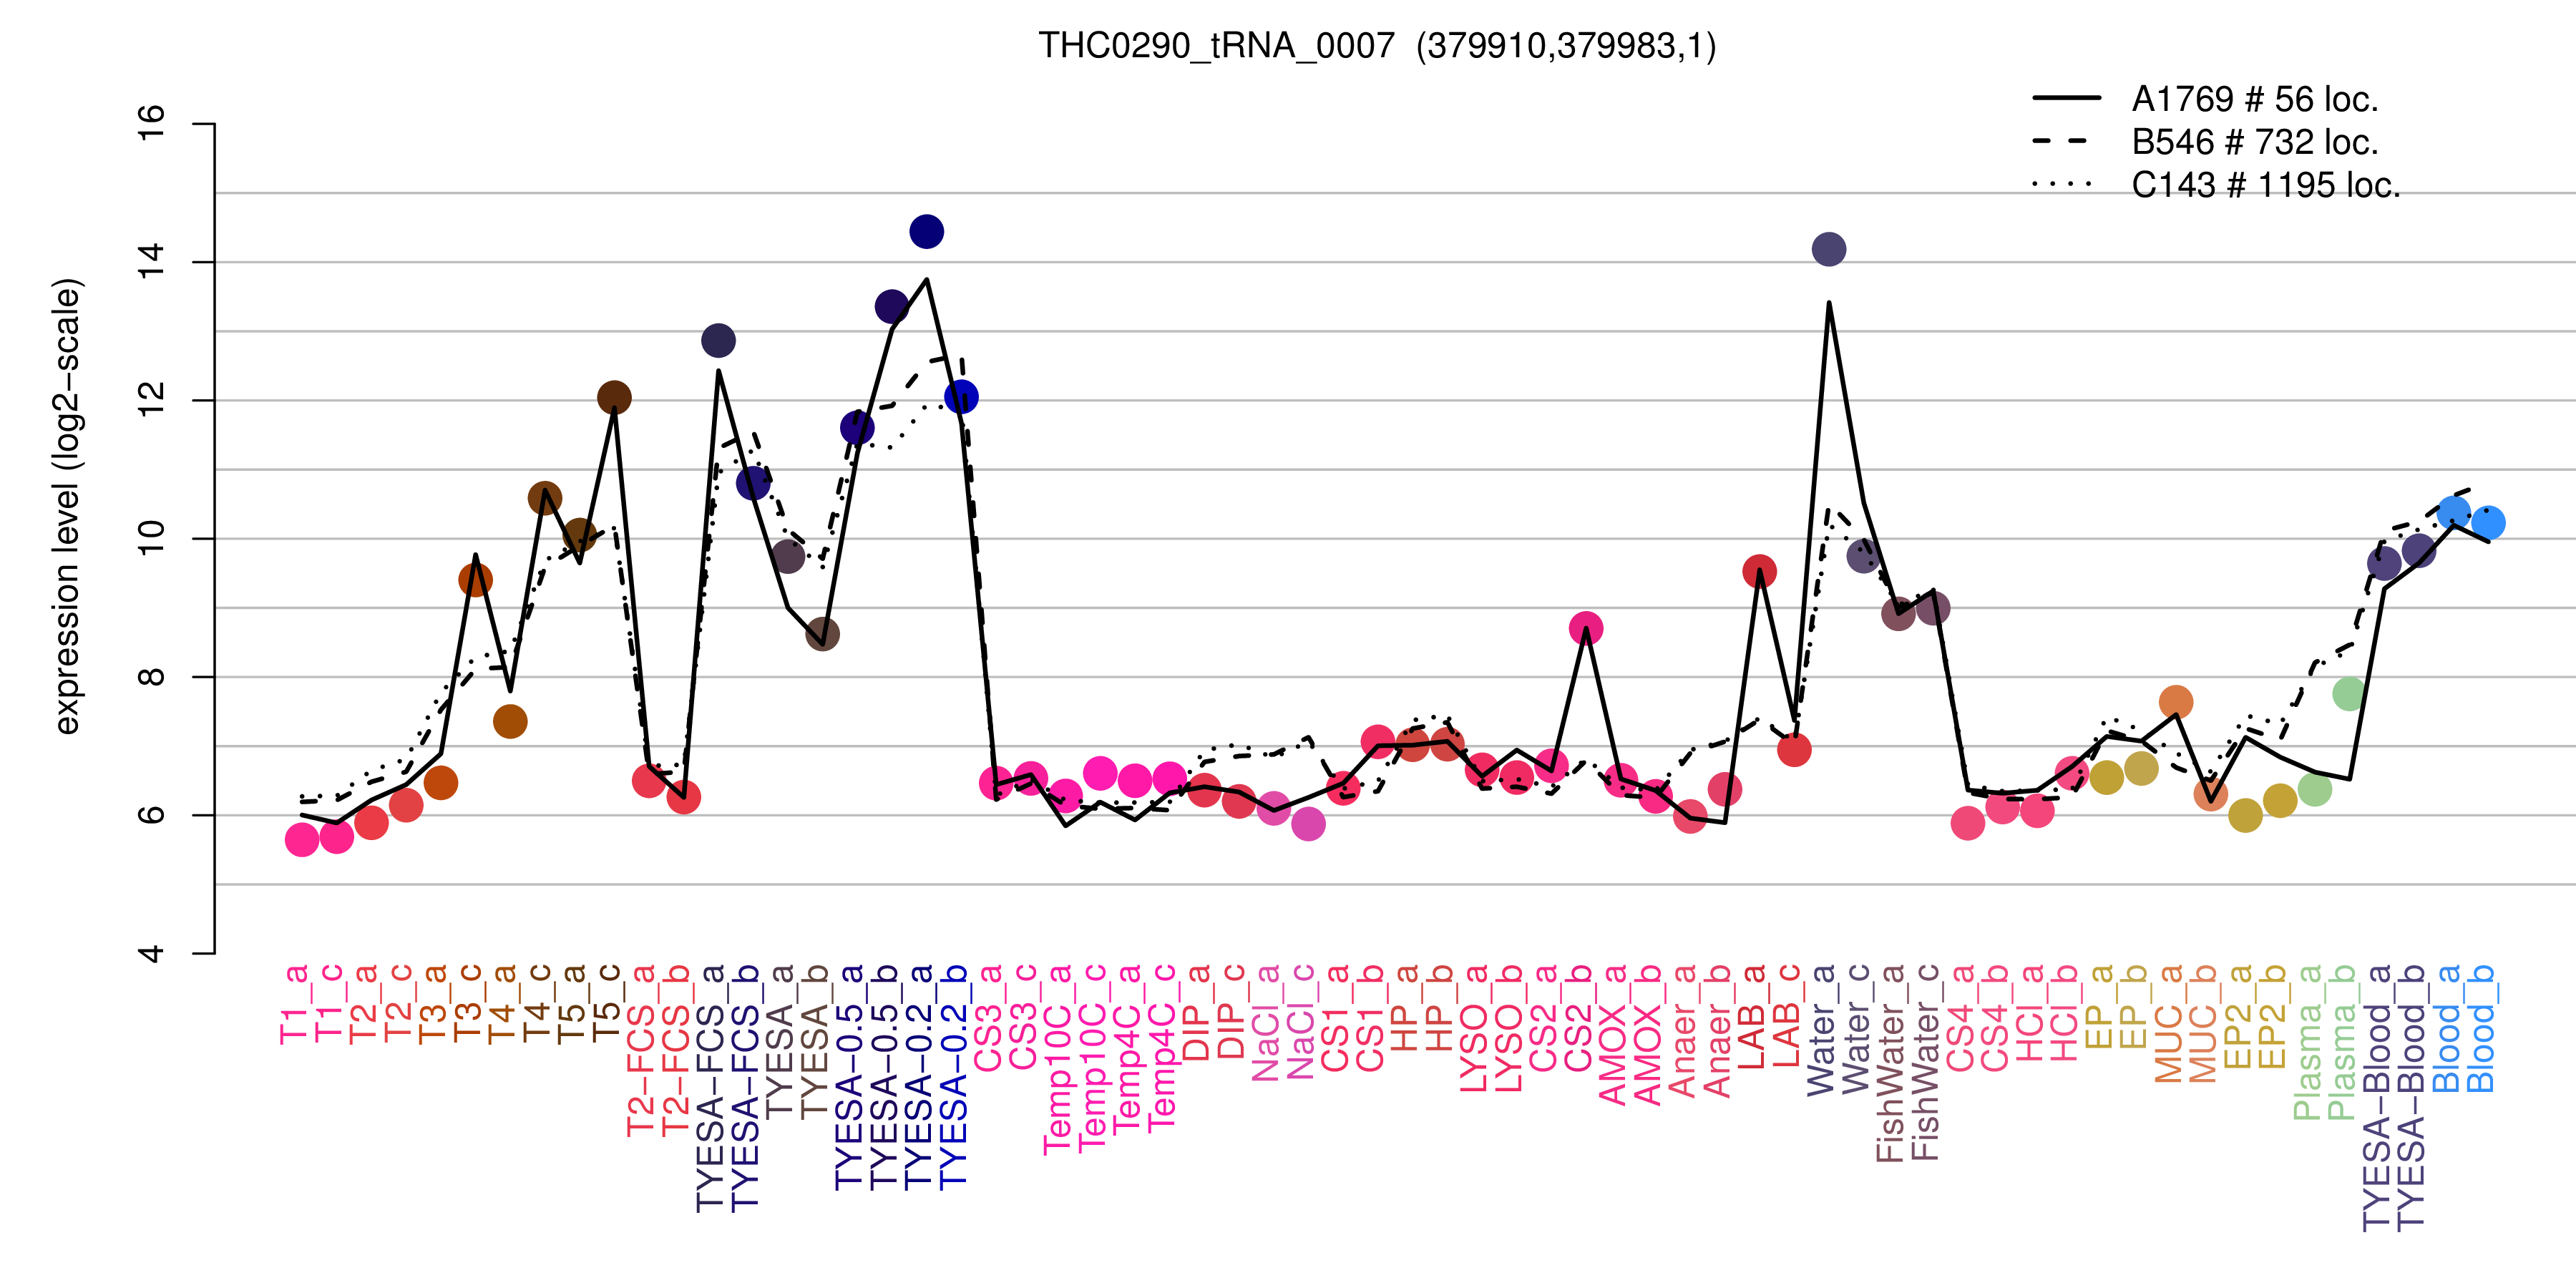 THC0290_tRNA_0007 expression levels among conditions